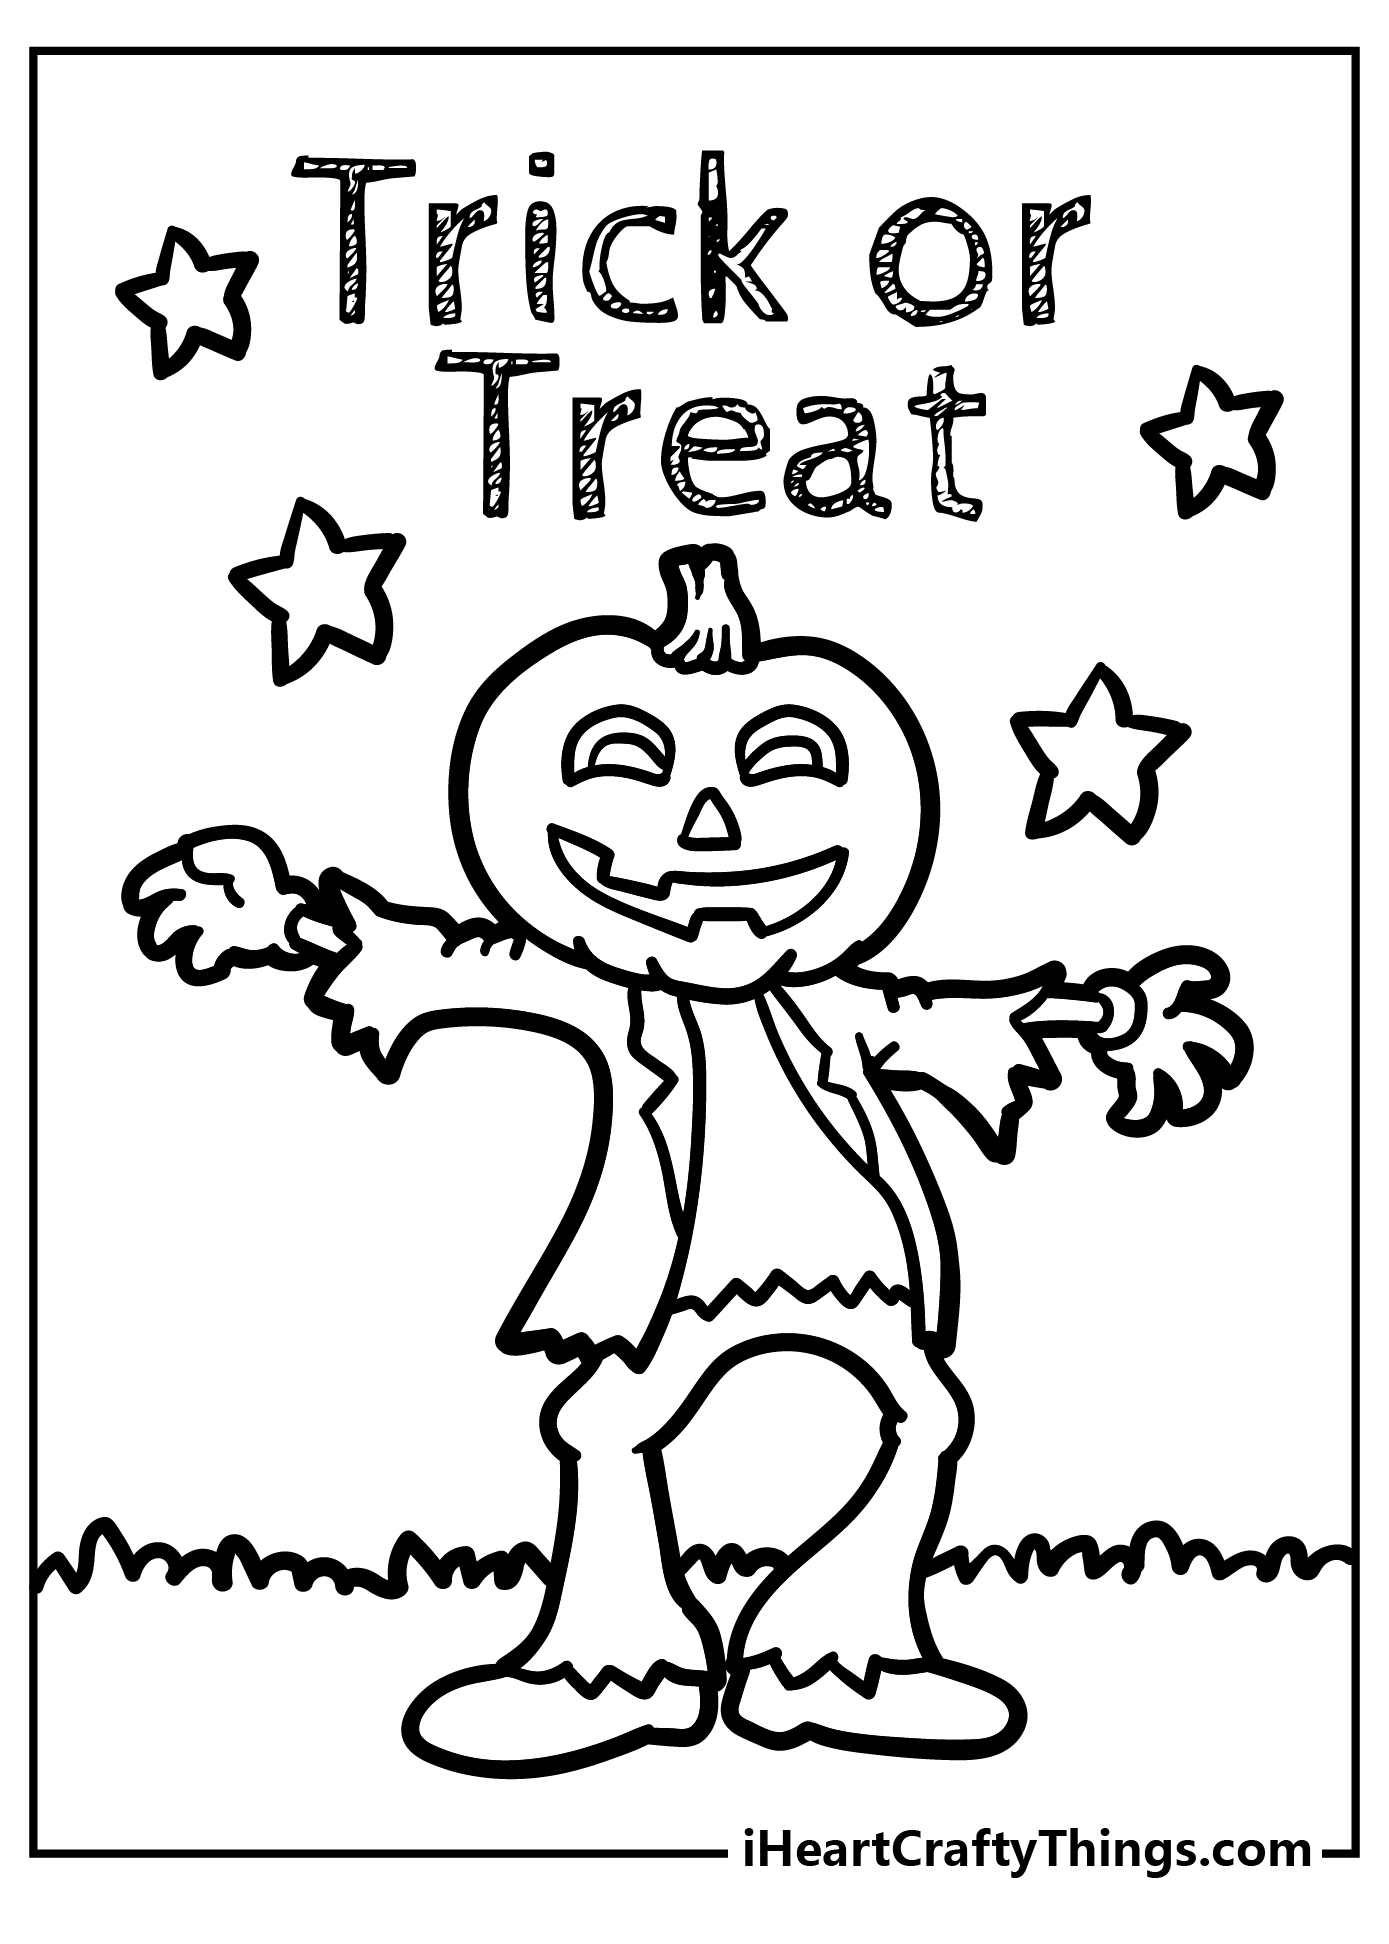 Trick Or Treat Coloring Sheet for children free download